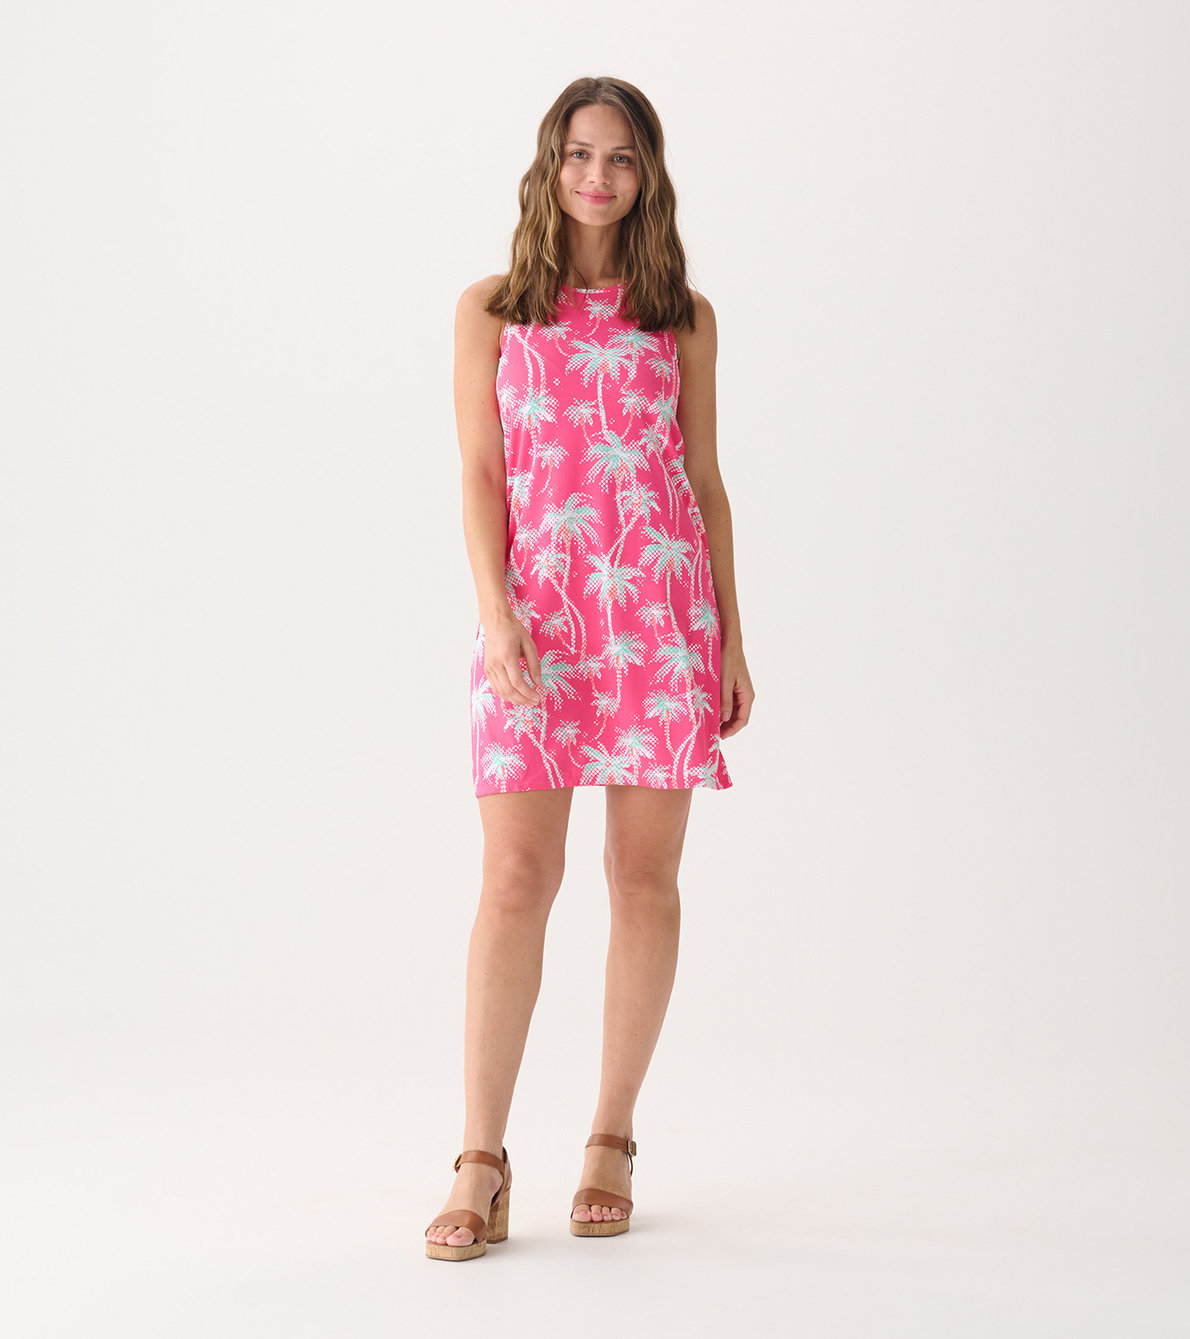 View larger image of Women's Palm Mirage Summer Dress